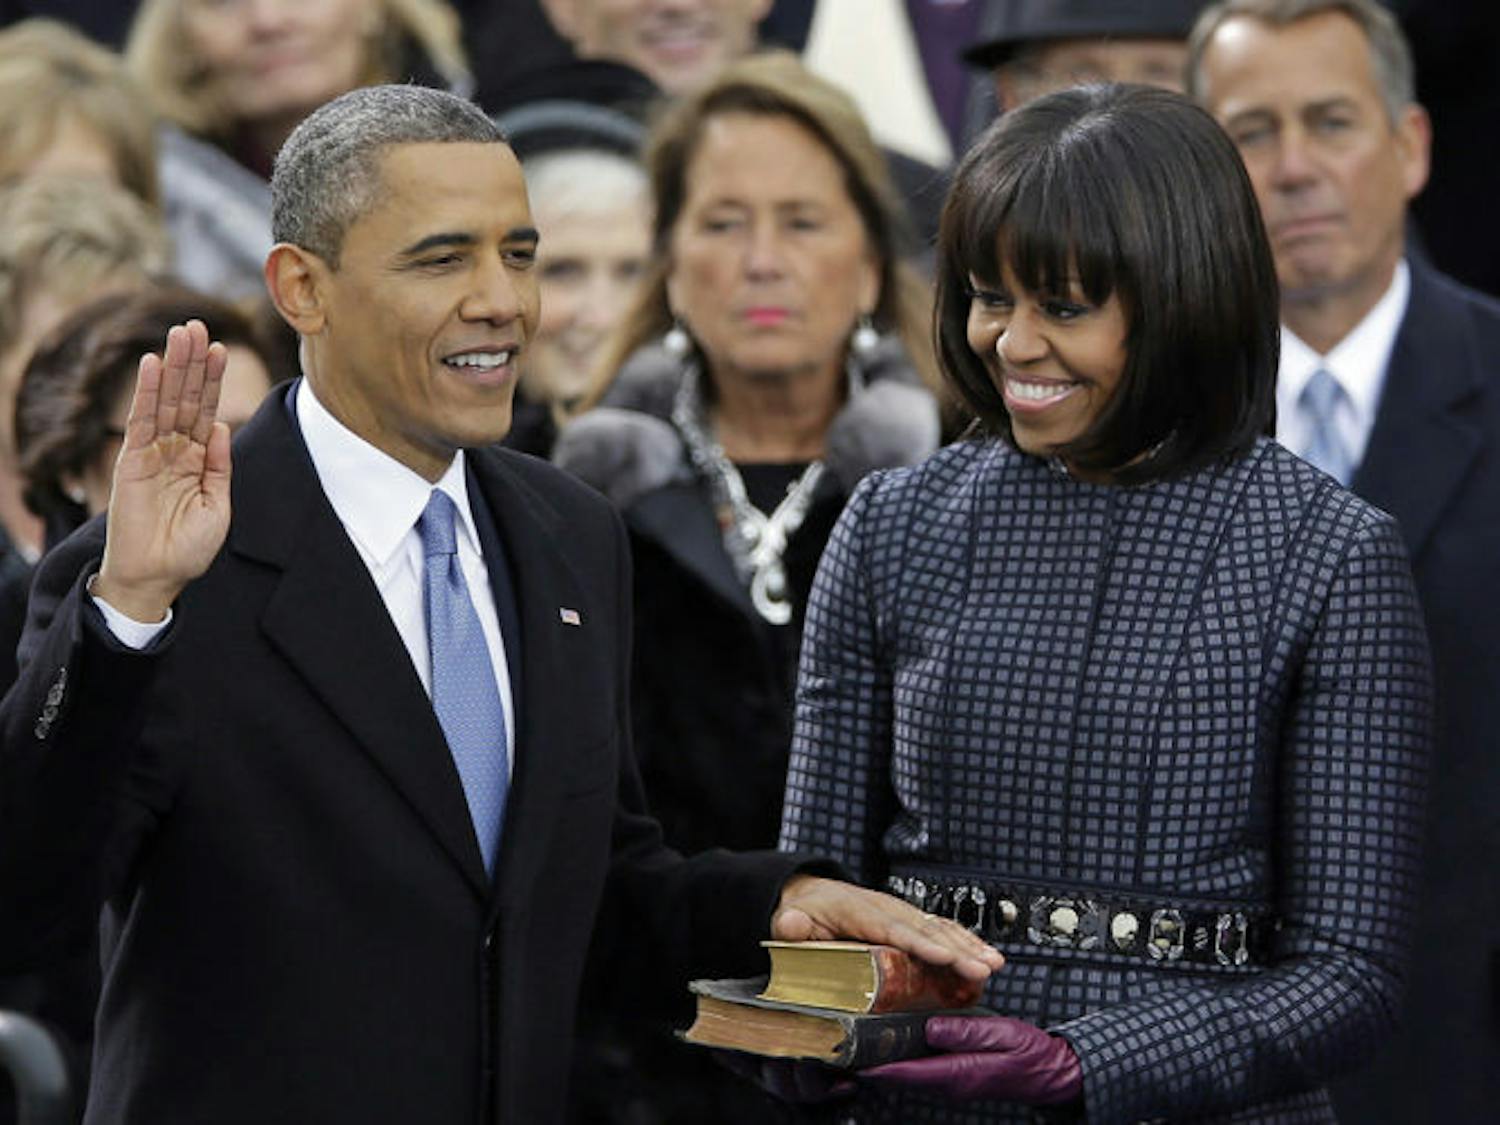 President Barack Obama receives the oath of office from Chief Justice John Roberts as first lady Michelle Obamas and his daughters Malia and Sasha look on at the ceremonial swearing-in at the U.S. Capitol during the 57th Presidential Inauguration in Washington, Monday, Jan. 21, 2013. (AP Photo/Carolyn Kaster)